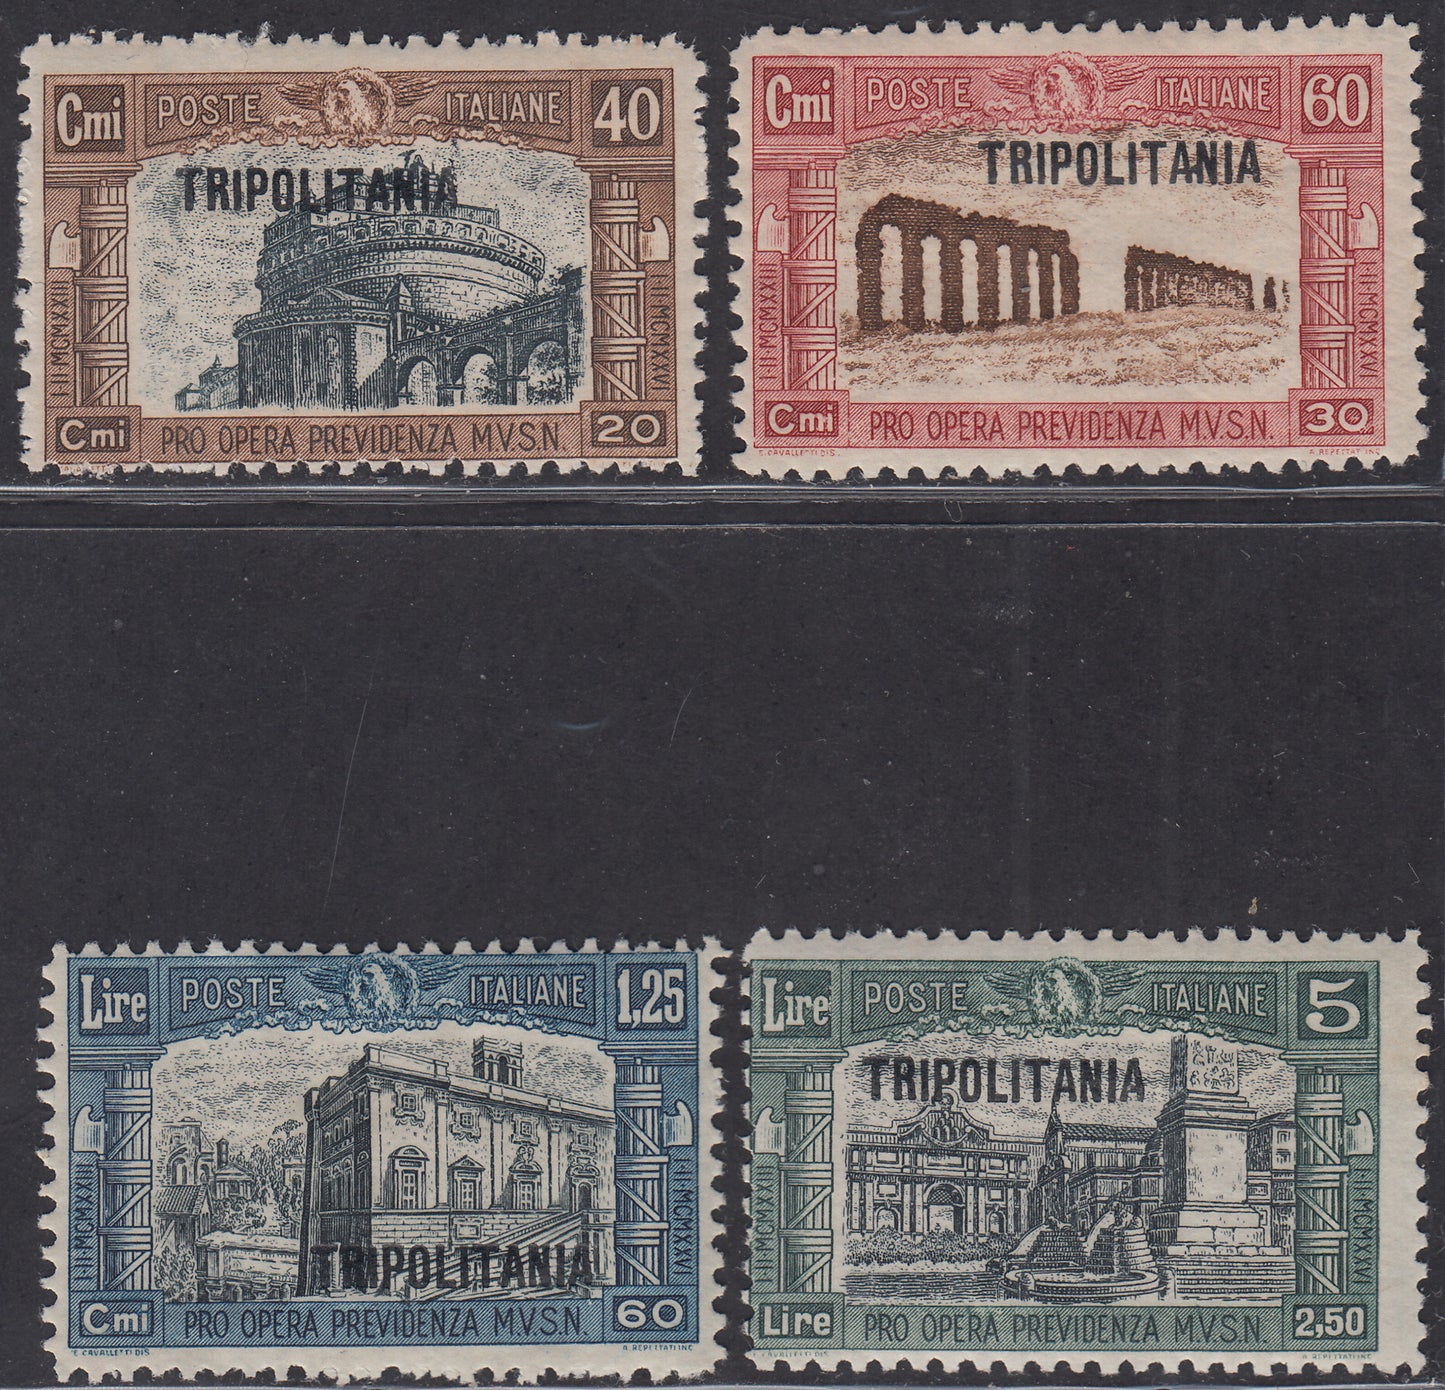 Trip12 - 1927 - Milizia 1st series, four new examples with intact tires (39/42)